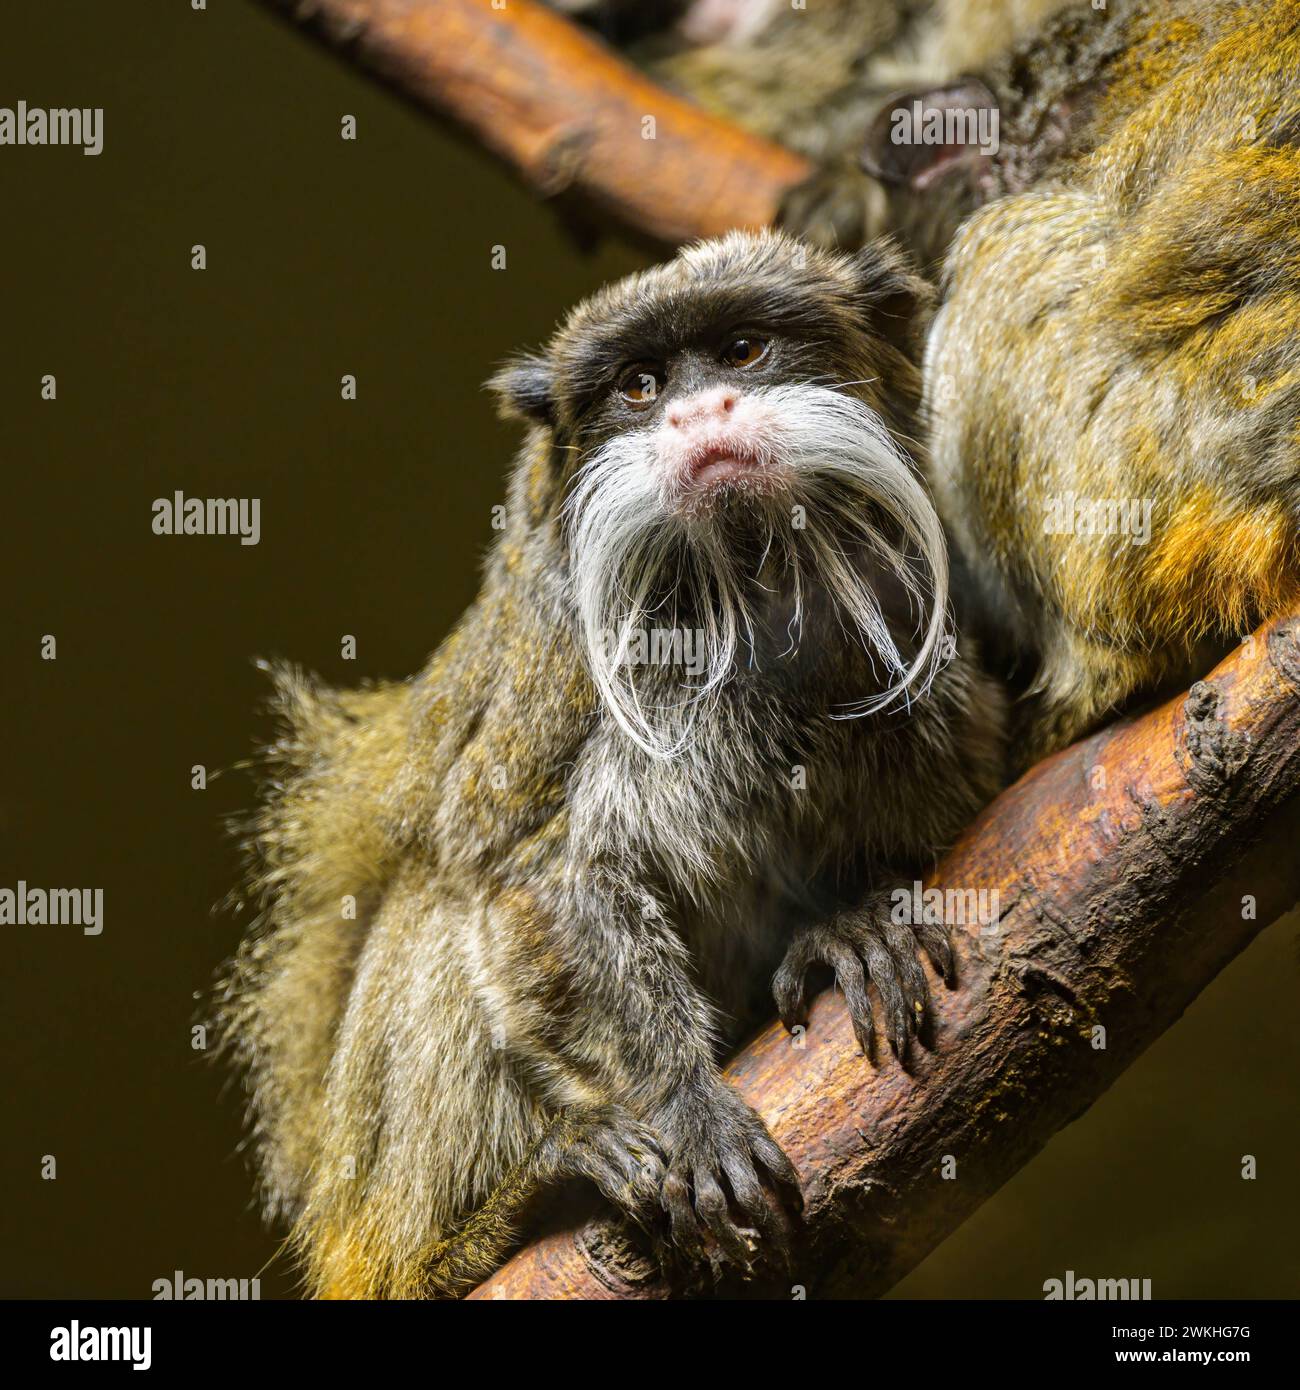 Portrait of an Emperor tamarin Saguinus imperator sitting on a piece of wood in a zoo Austria Stock Photo